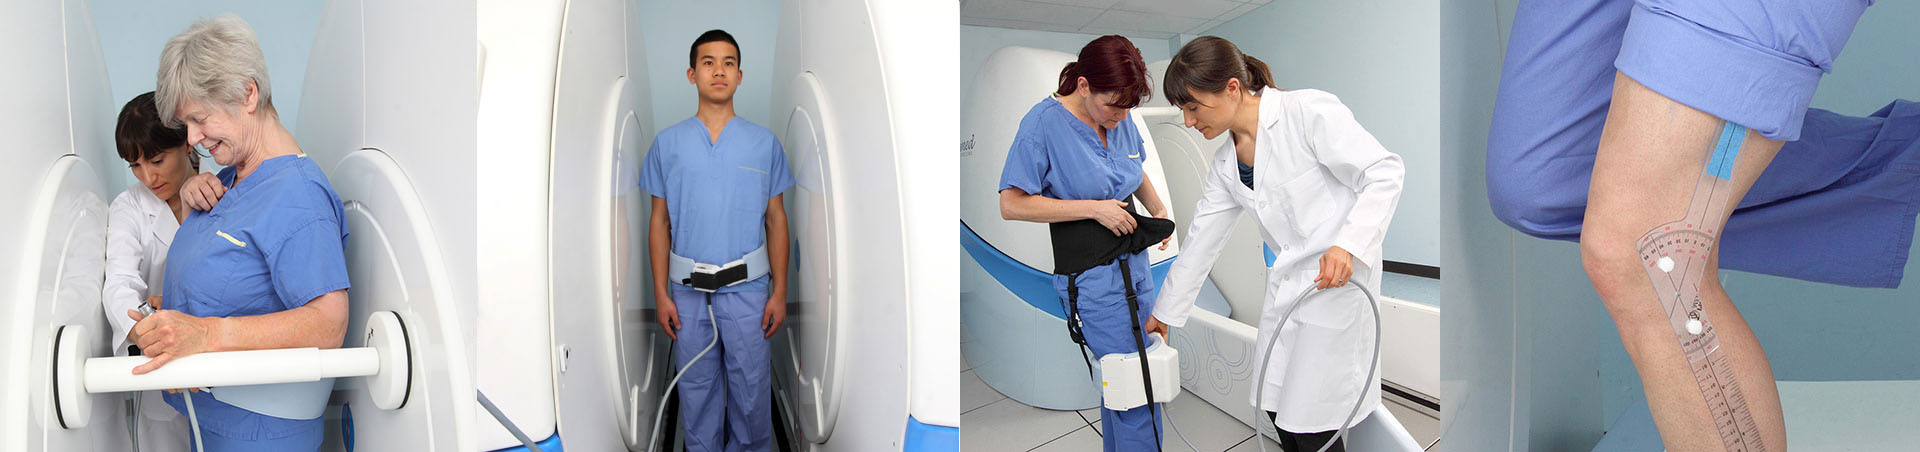 Patients and staff using scanner